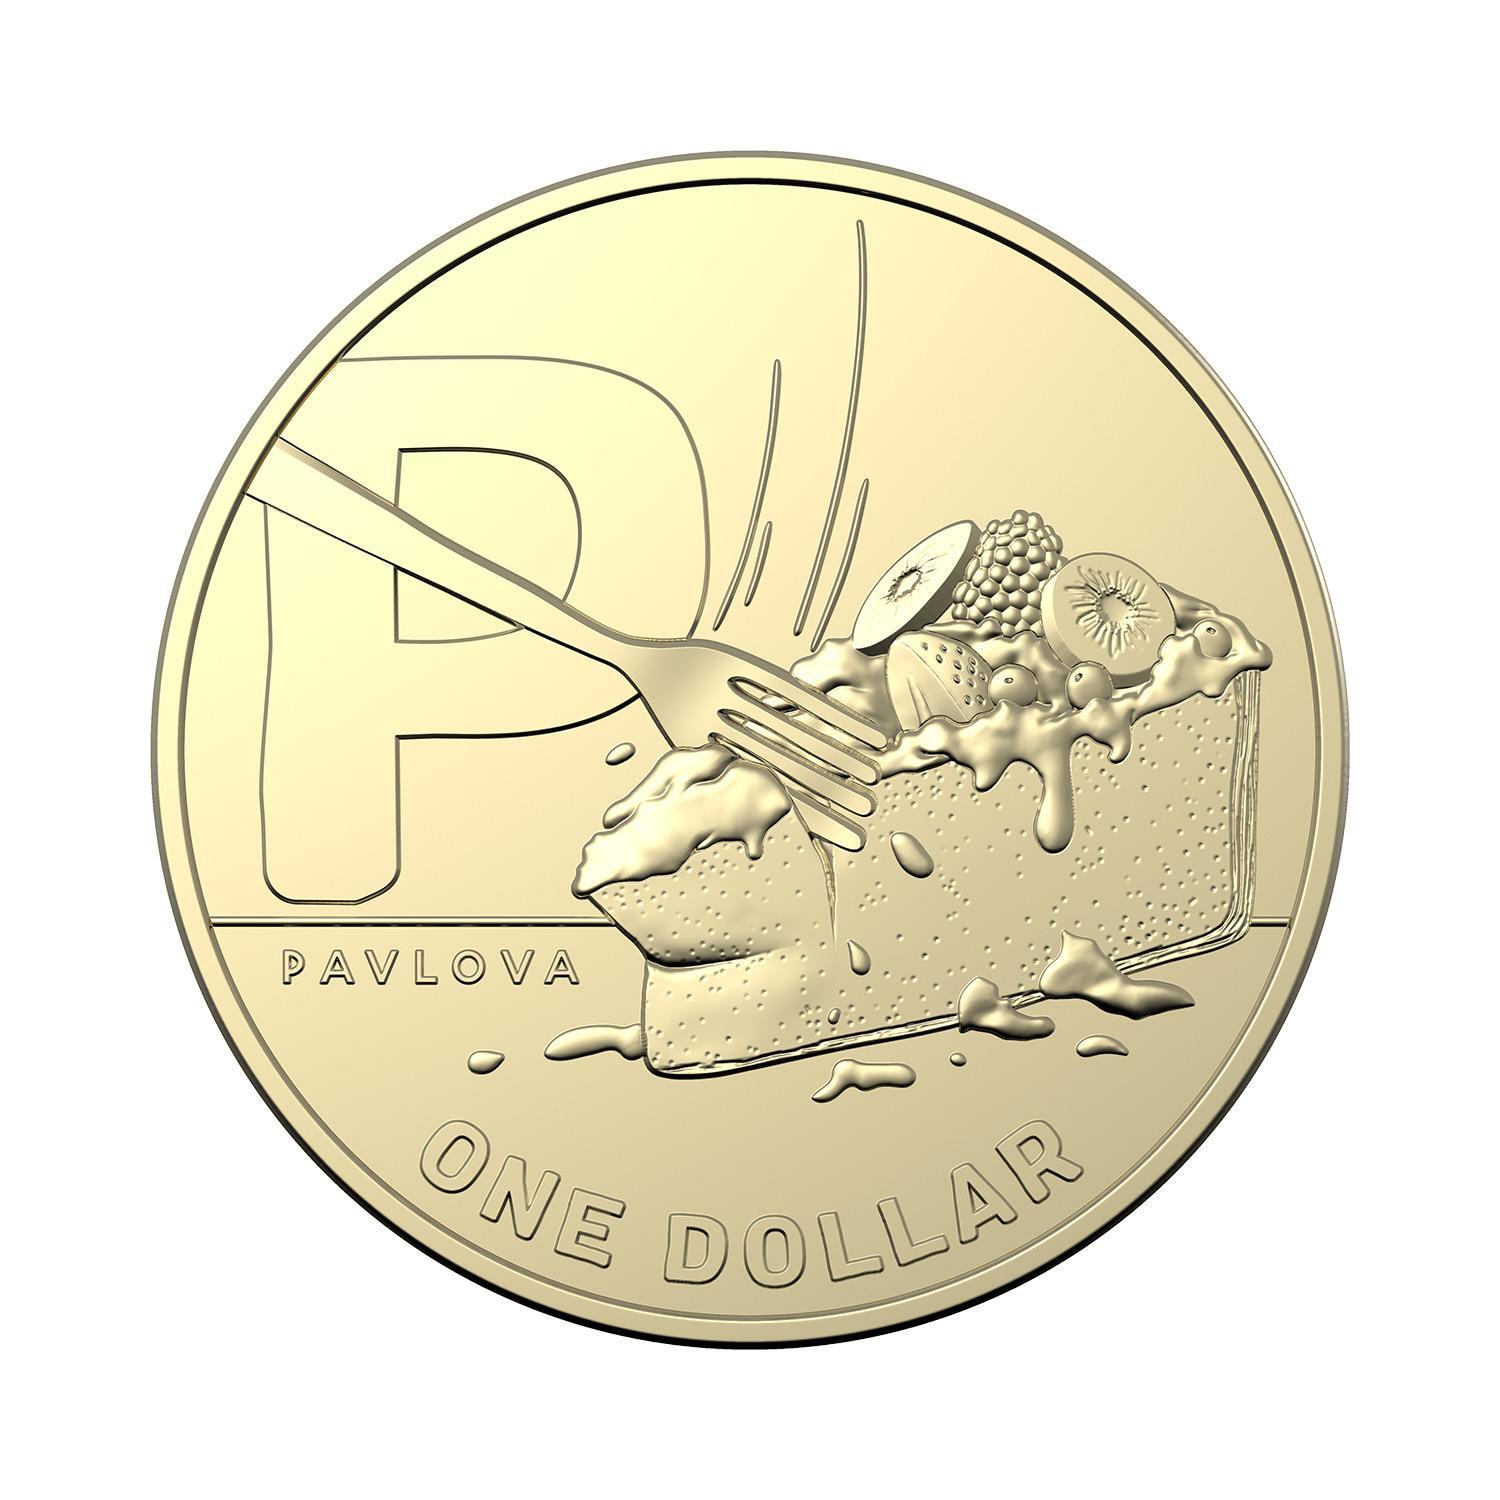 2021 $1 Great Aussie Coin Hunt 2 – Letter 'P' coin